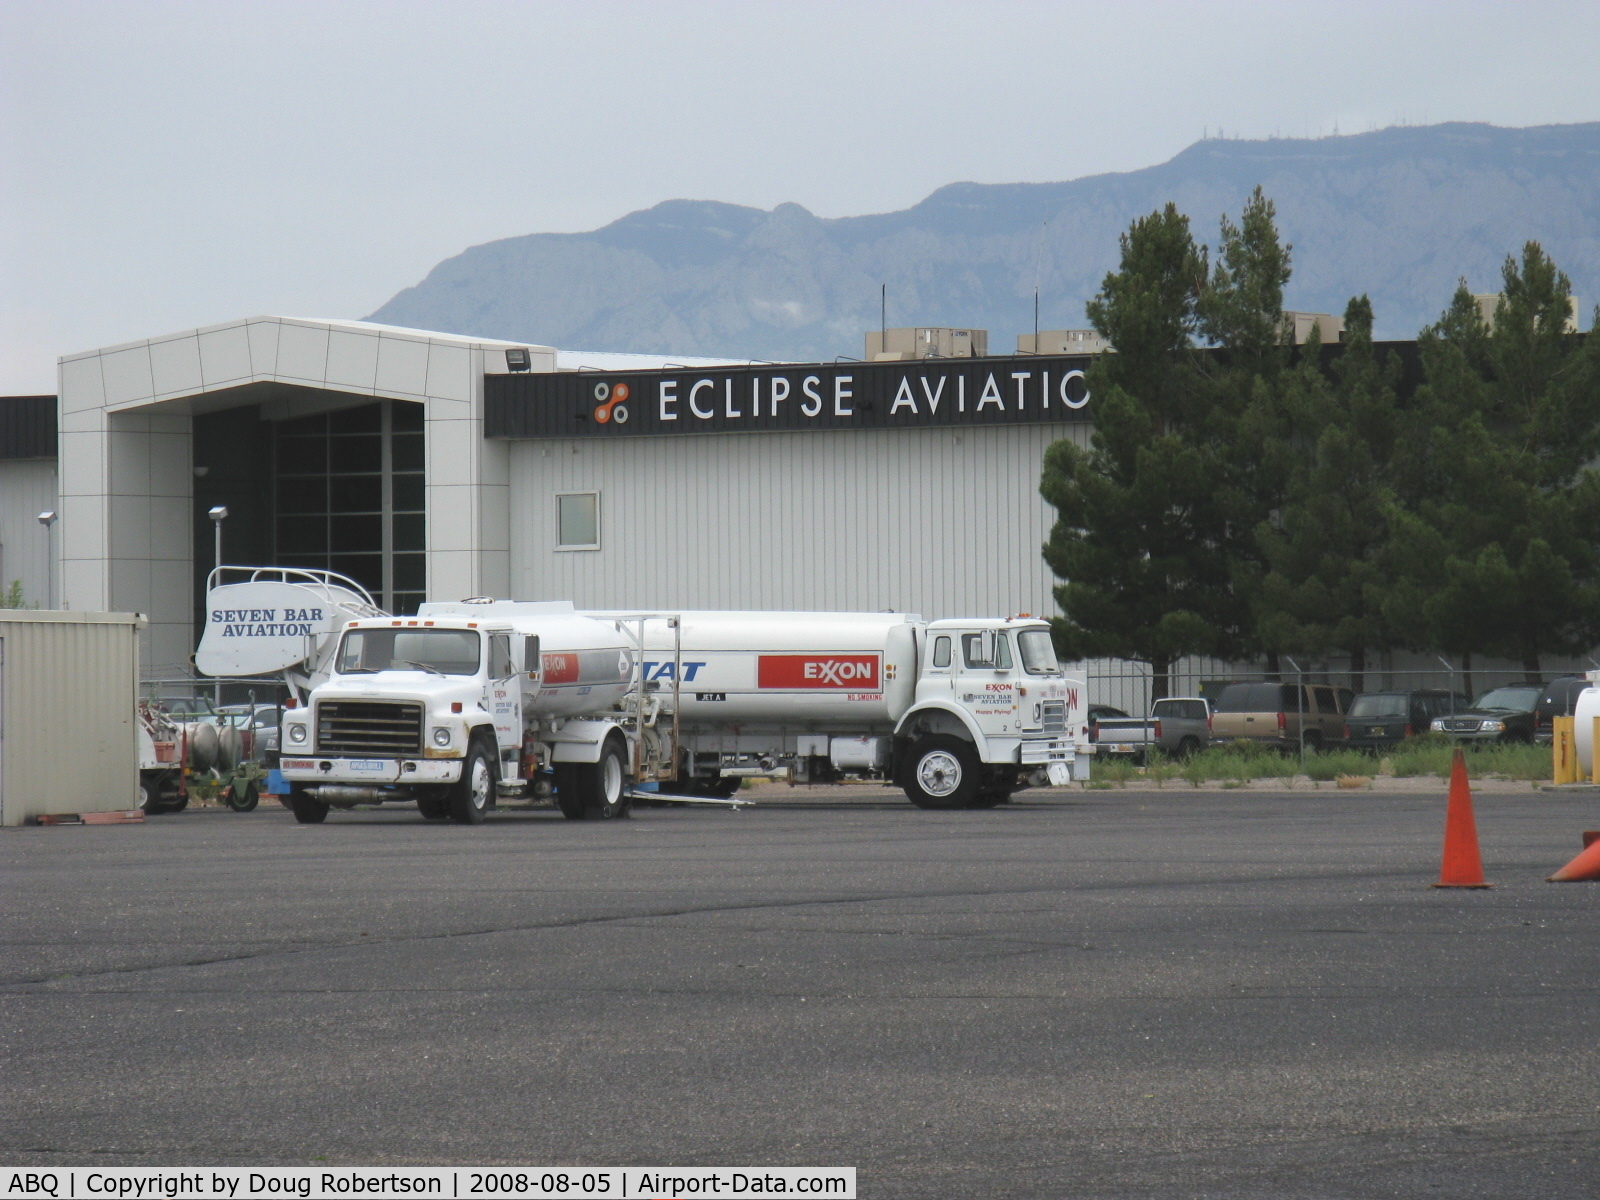 Albuquerque International Sunport Airport (ABQ) - Eclipse Aviation-EA500 Jet, Flight Test/Customer Delivery Hangar and Offices